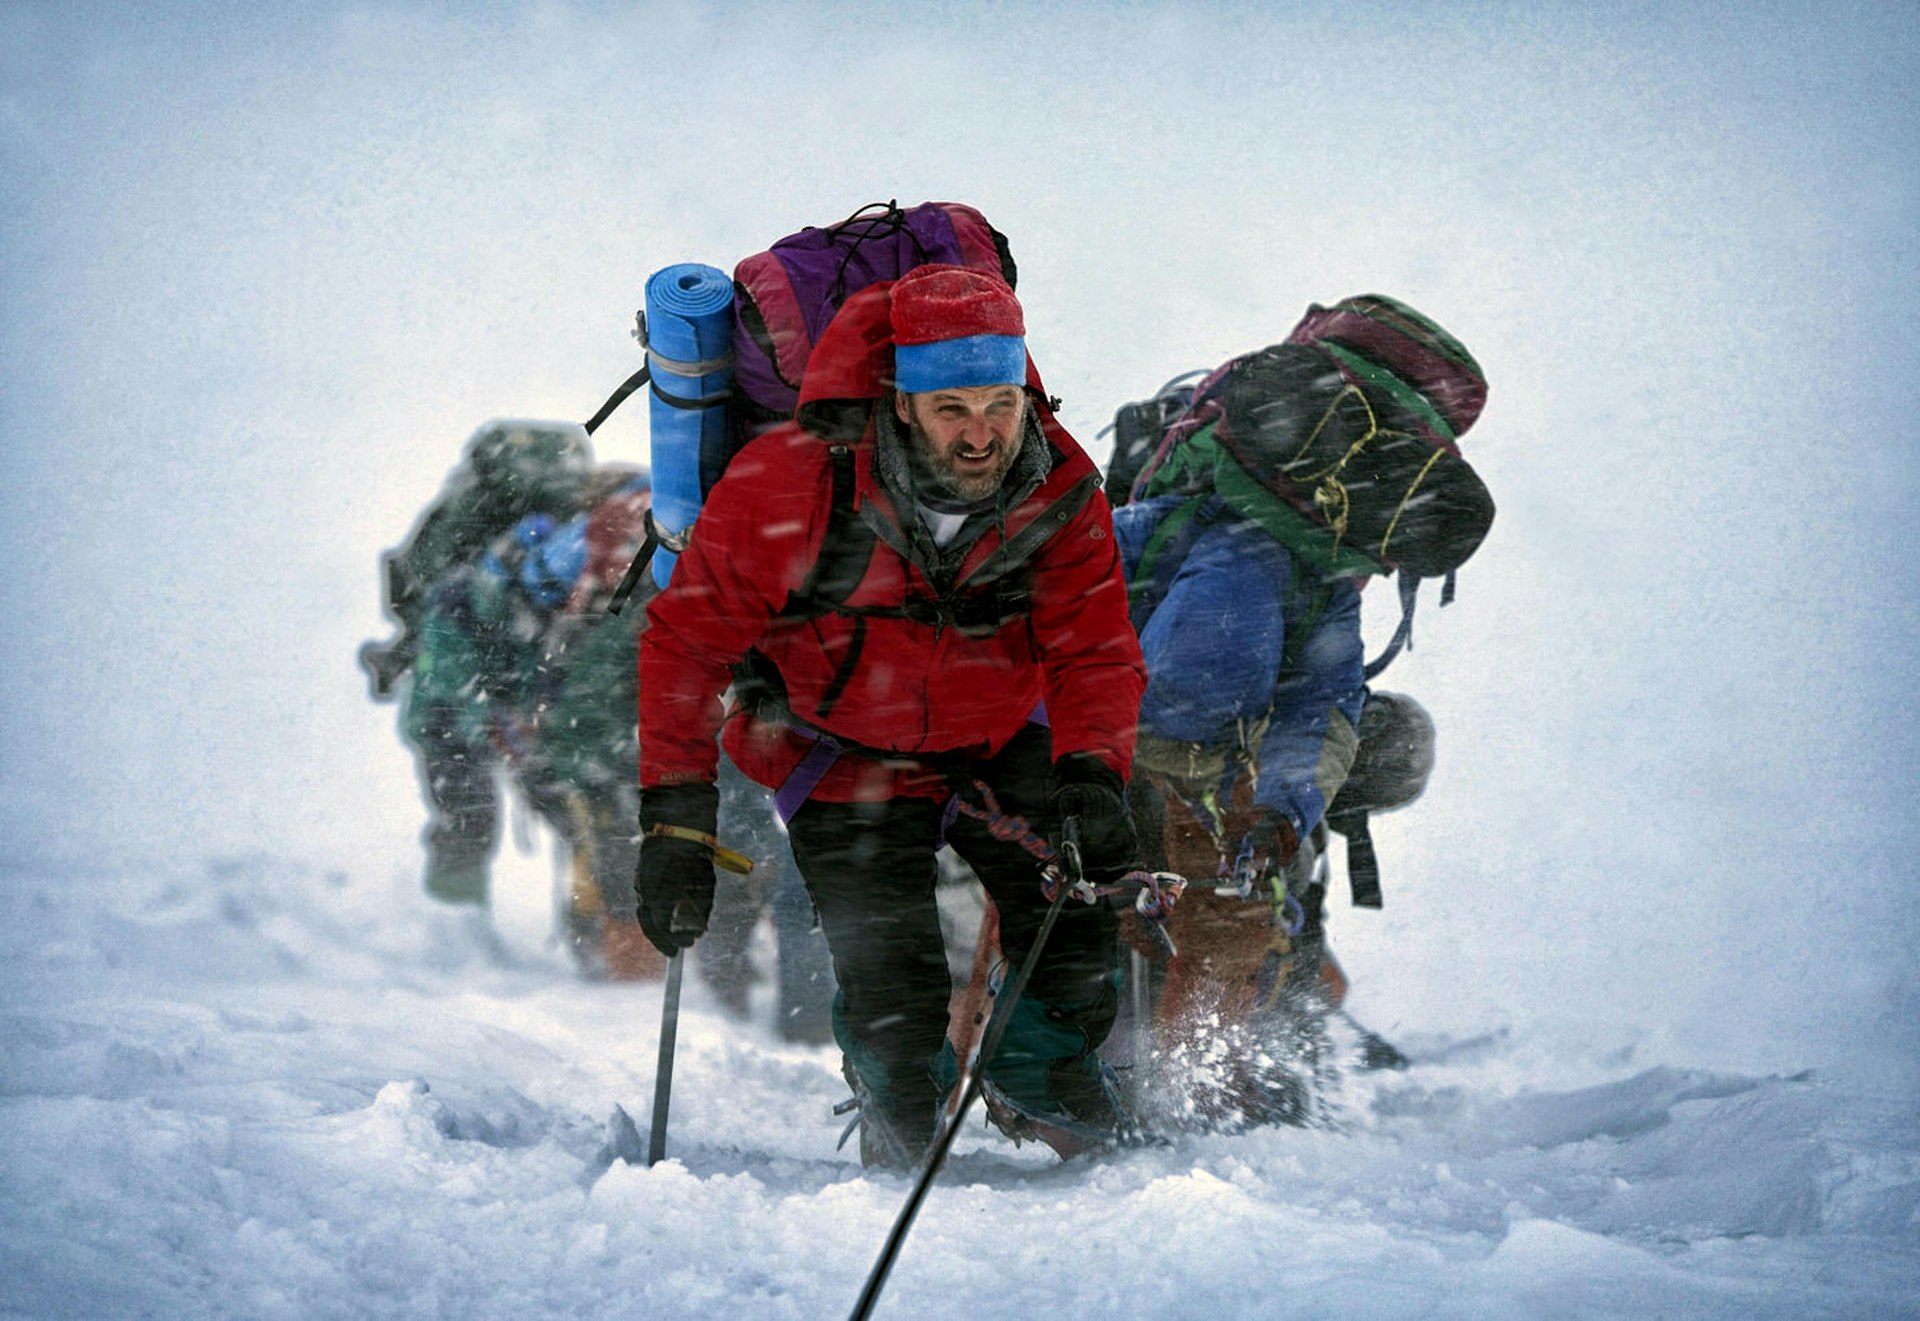 A still from the 2015 film “Everest” depicting mountain climbers on a snowy slope